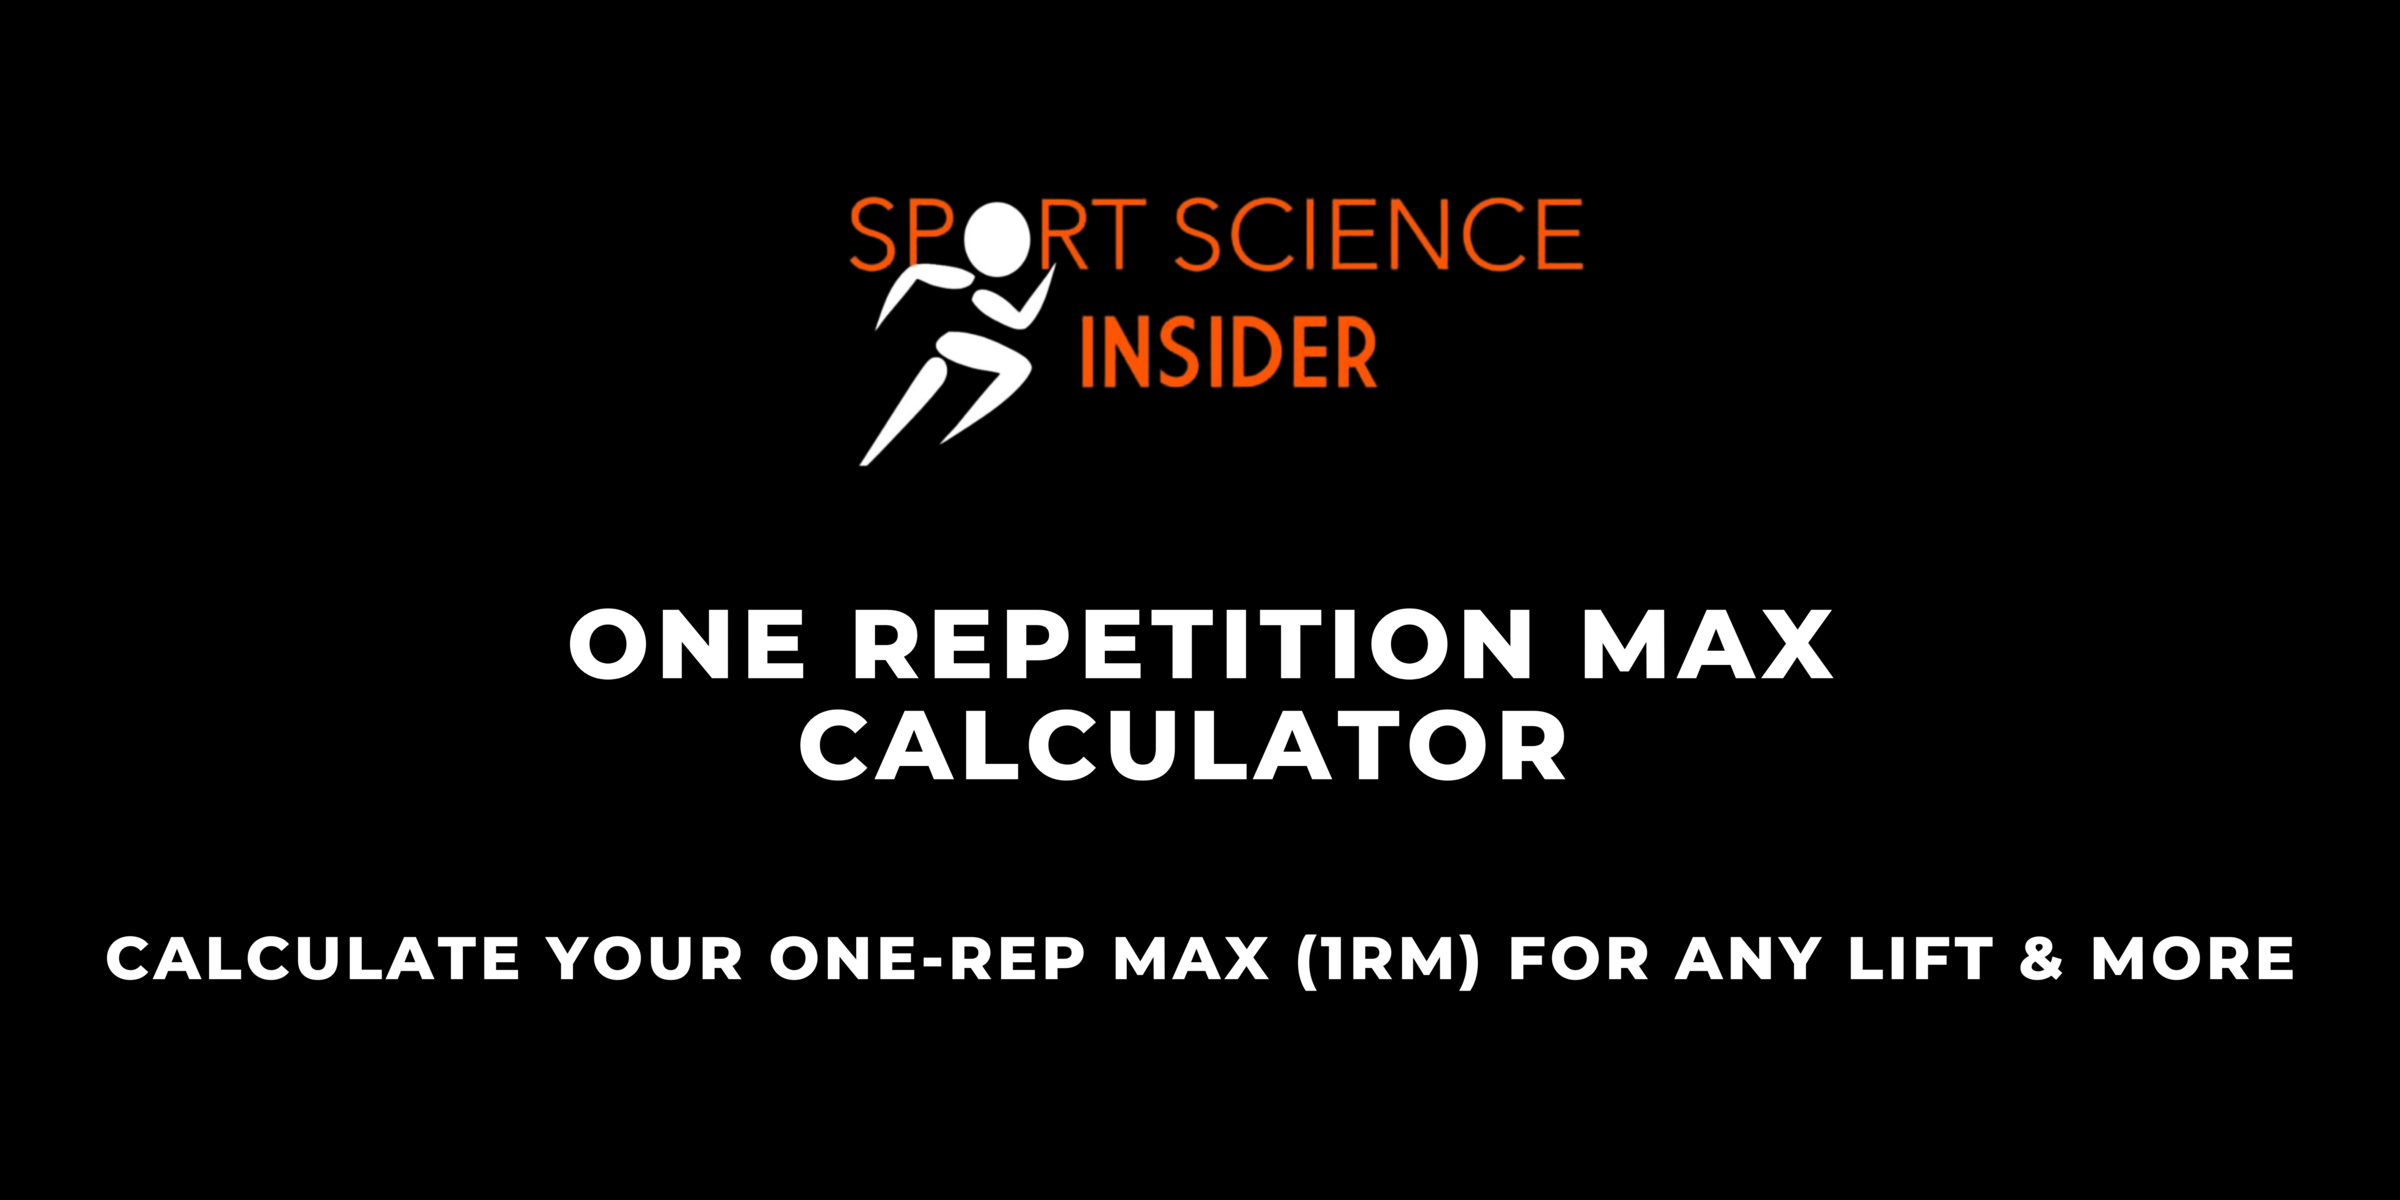 One Repetition Max Calculator